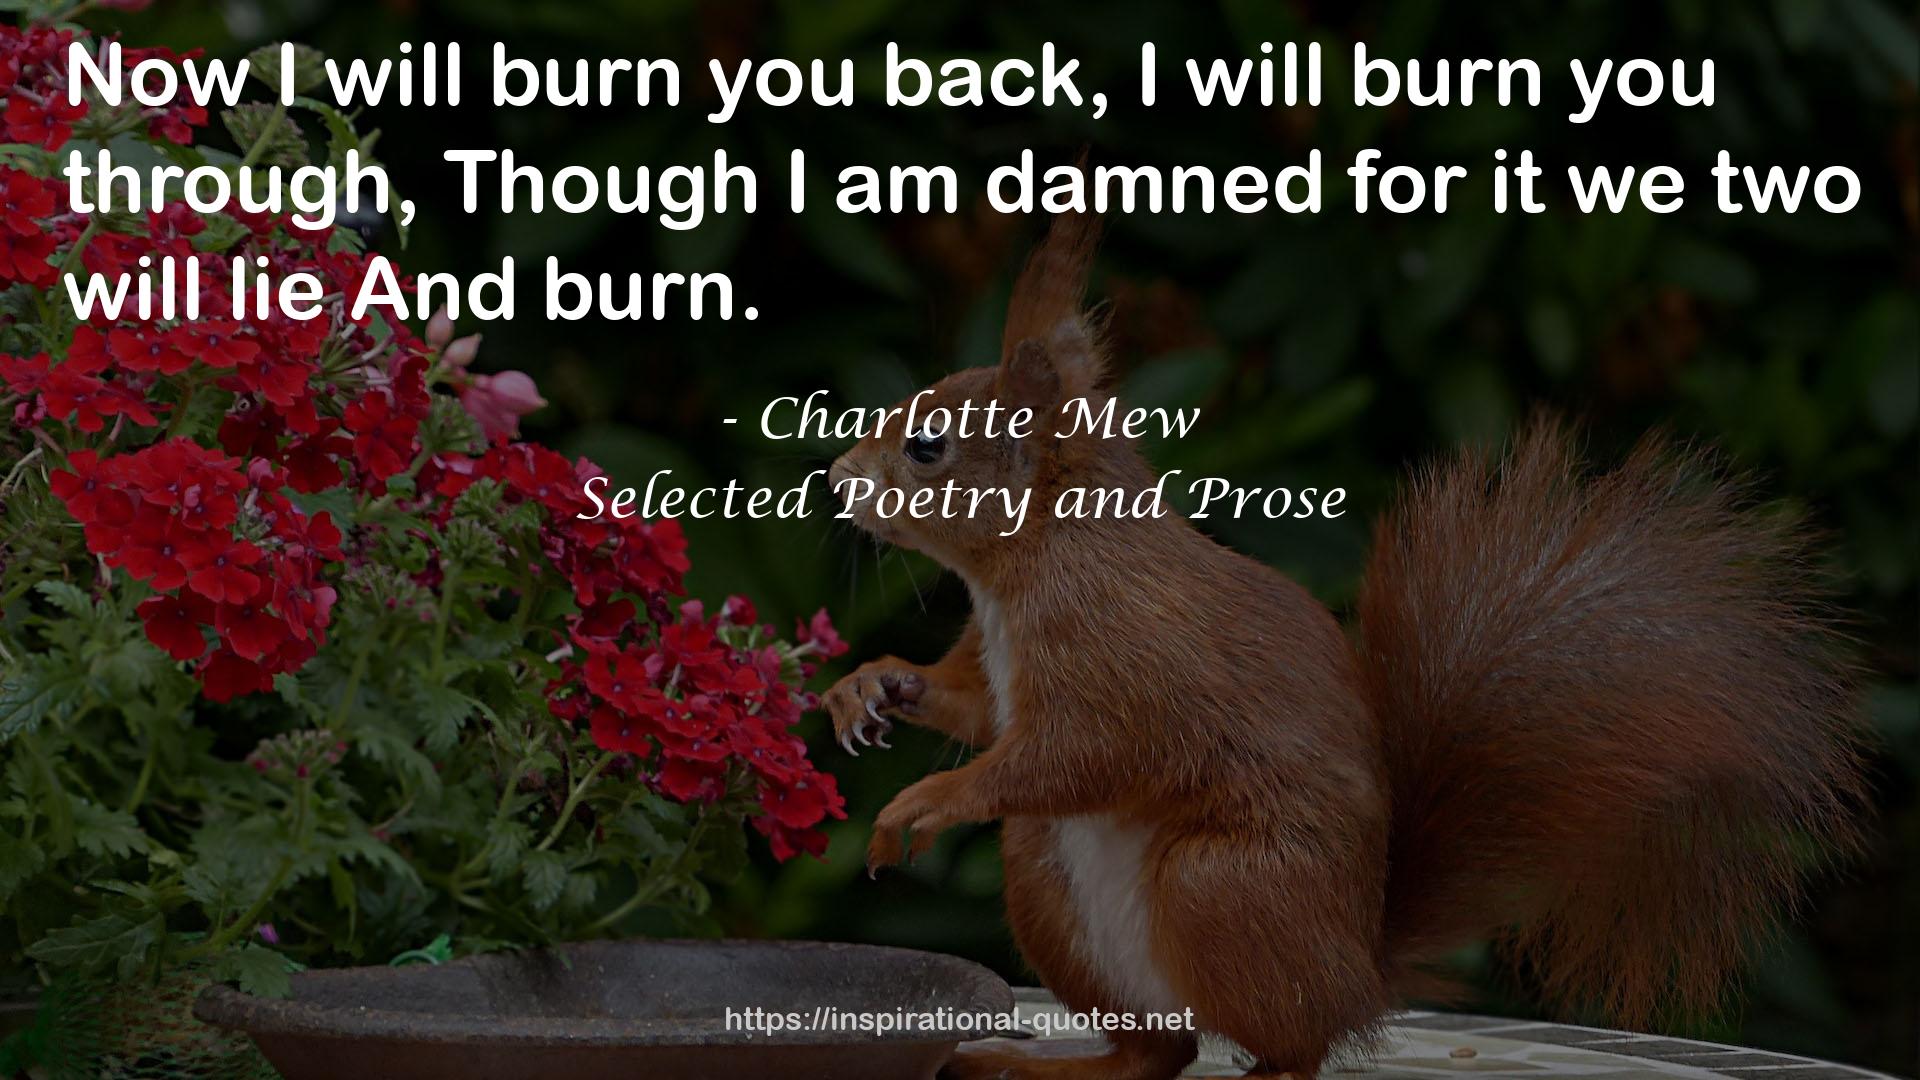 Selected Poetry and Prose QUOTES